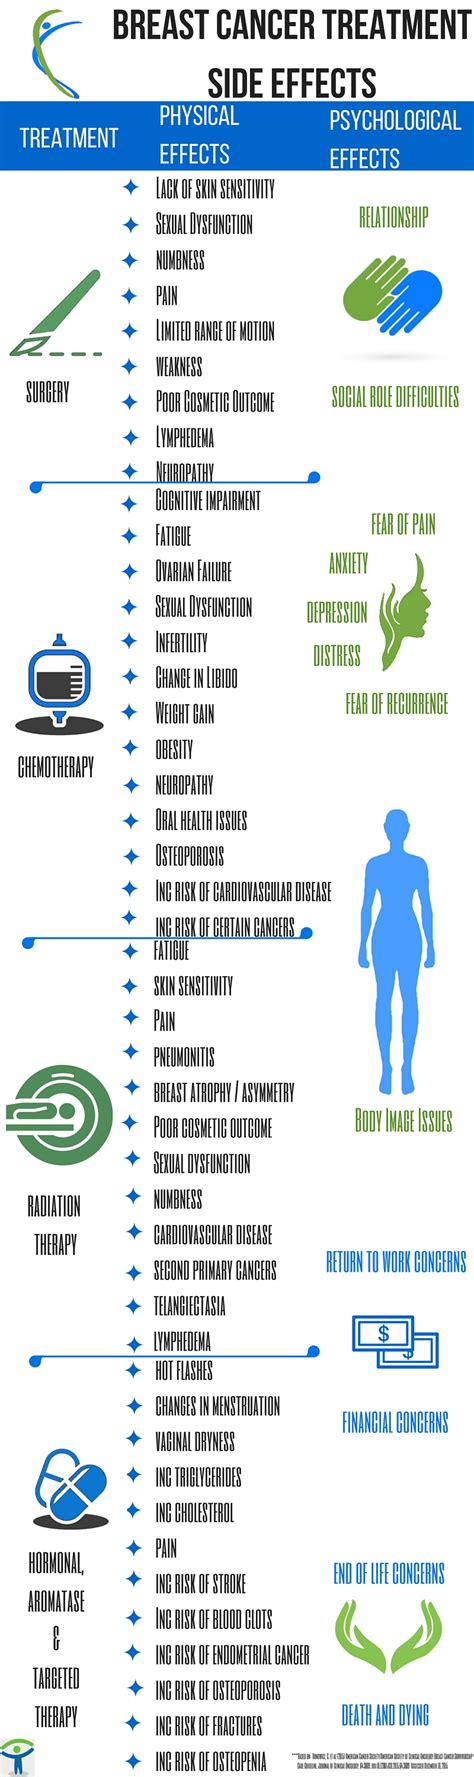 Whats Next Side Effects Of Breast Cancer Treatment Infographic